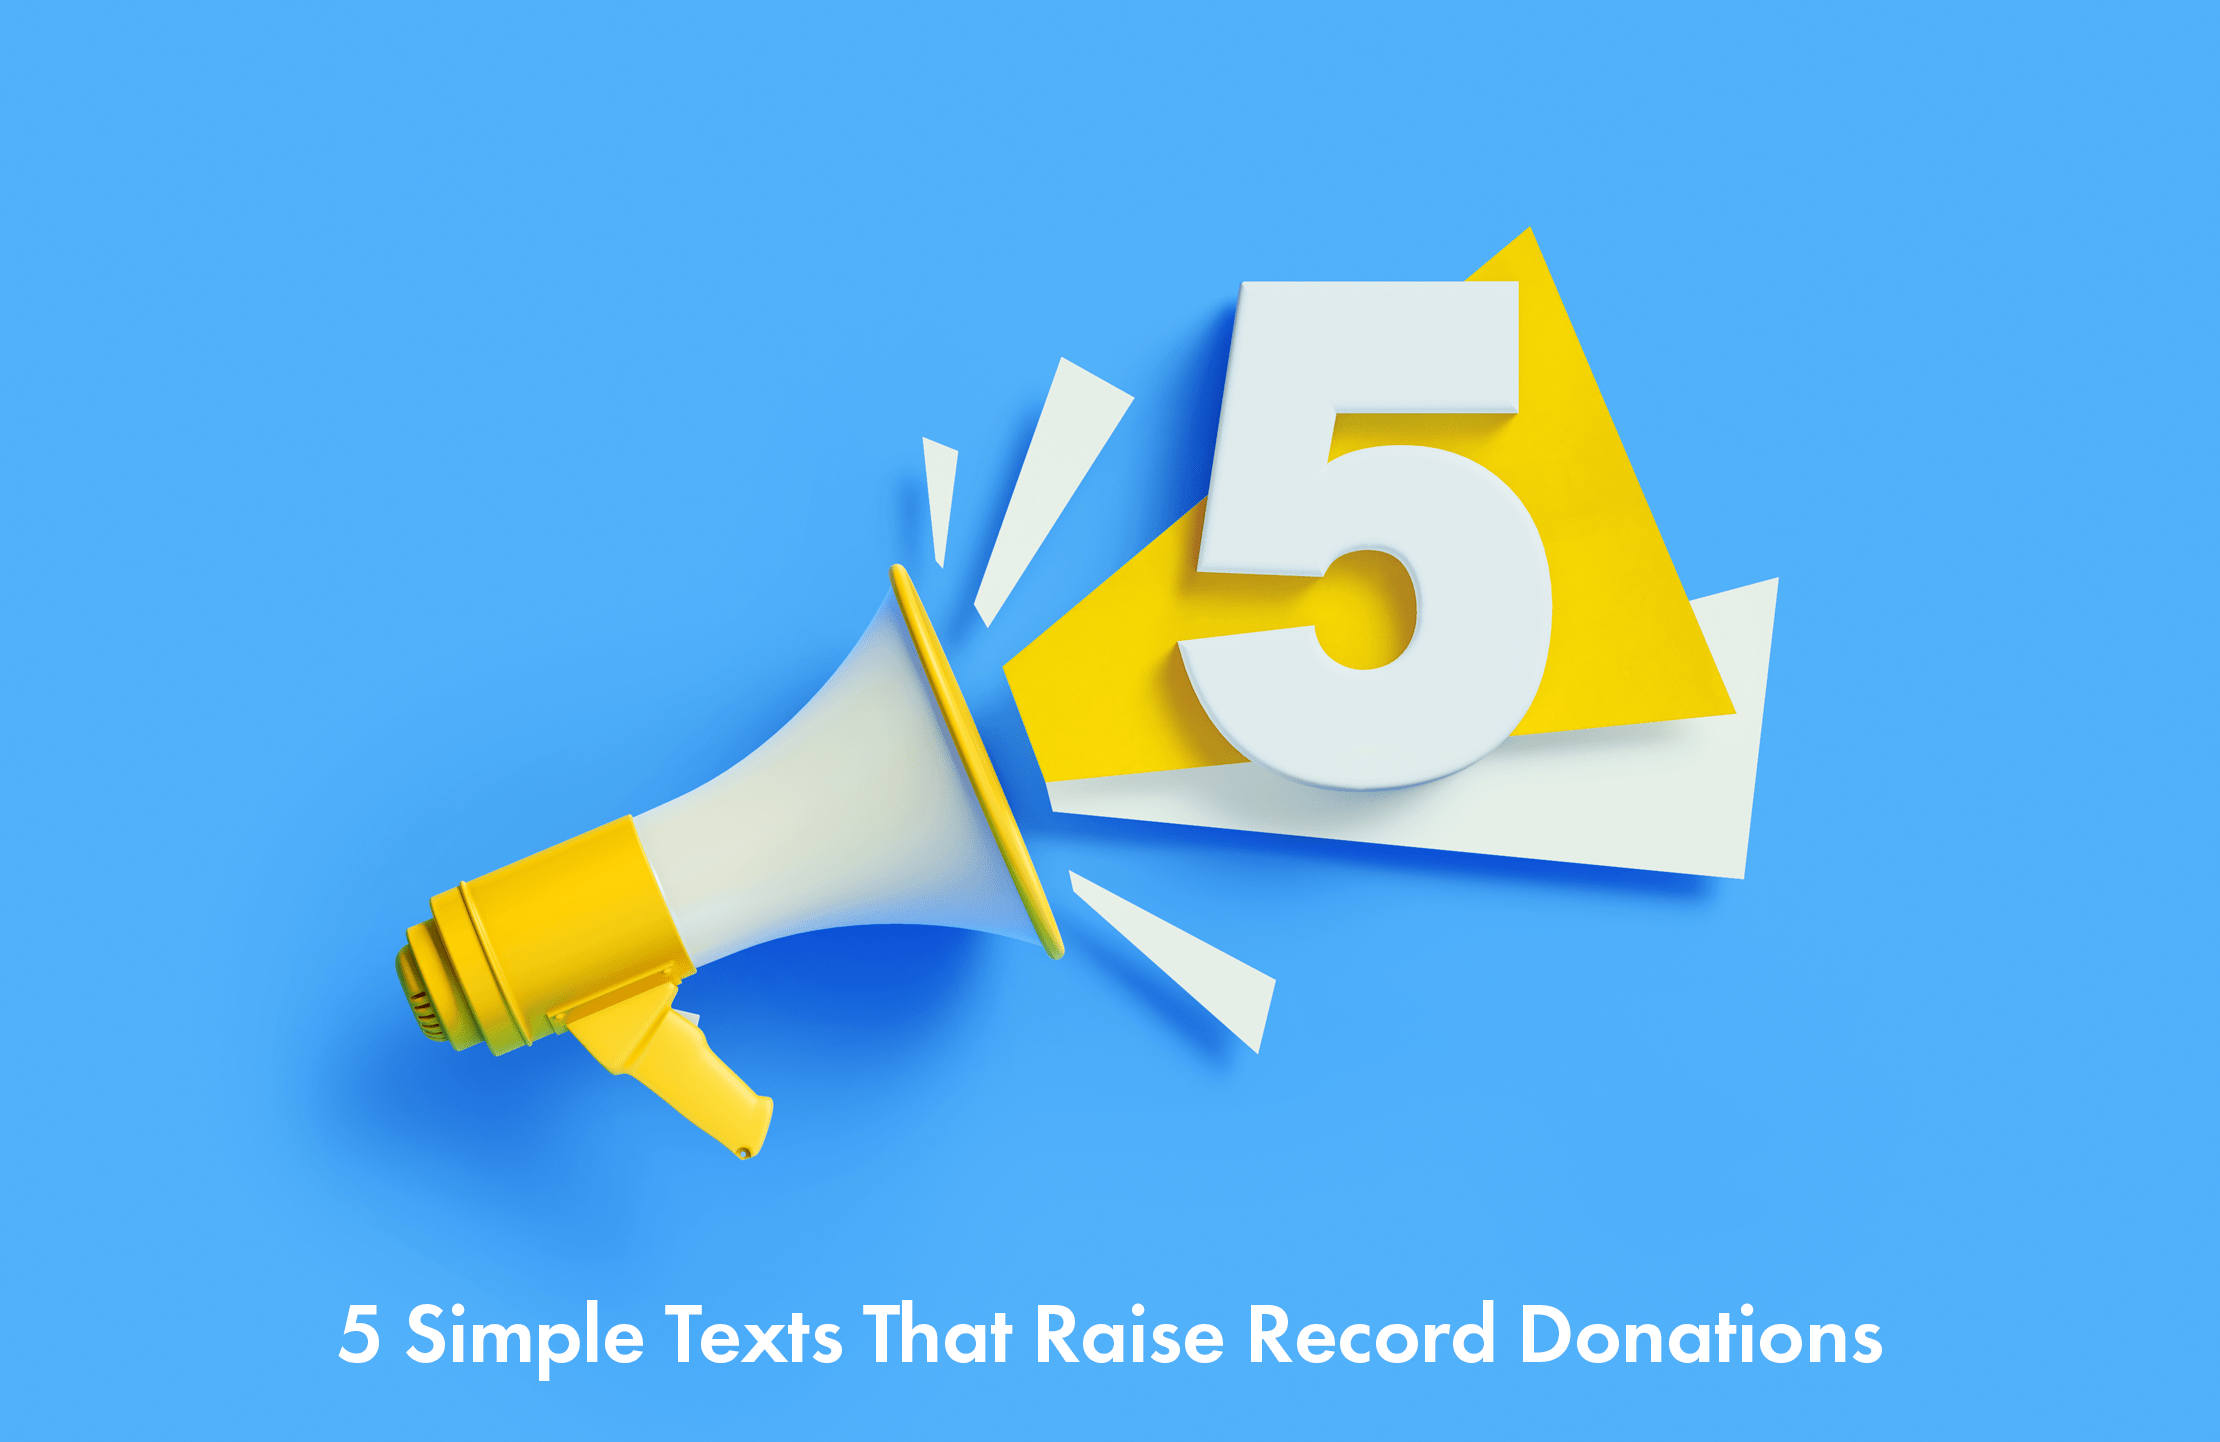 5 Simple Texts That Raise Record Donations